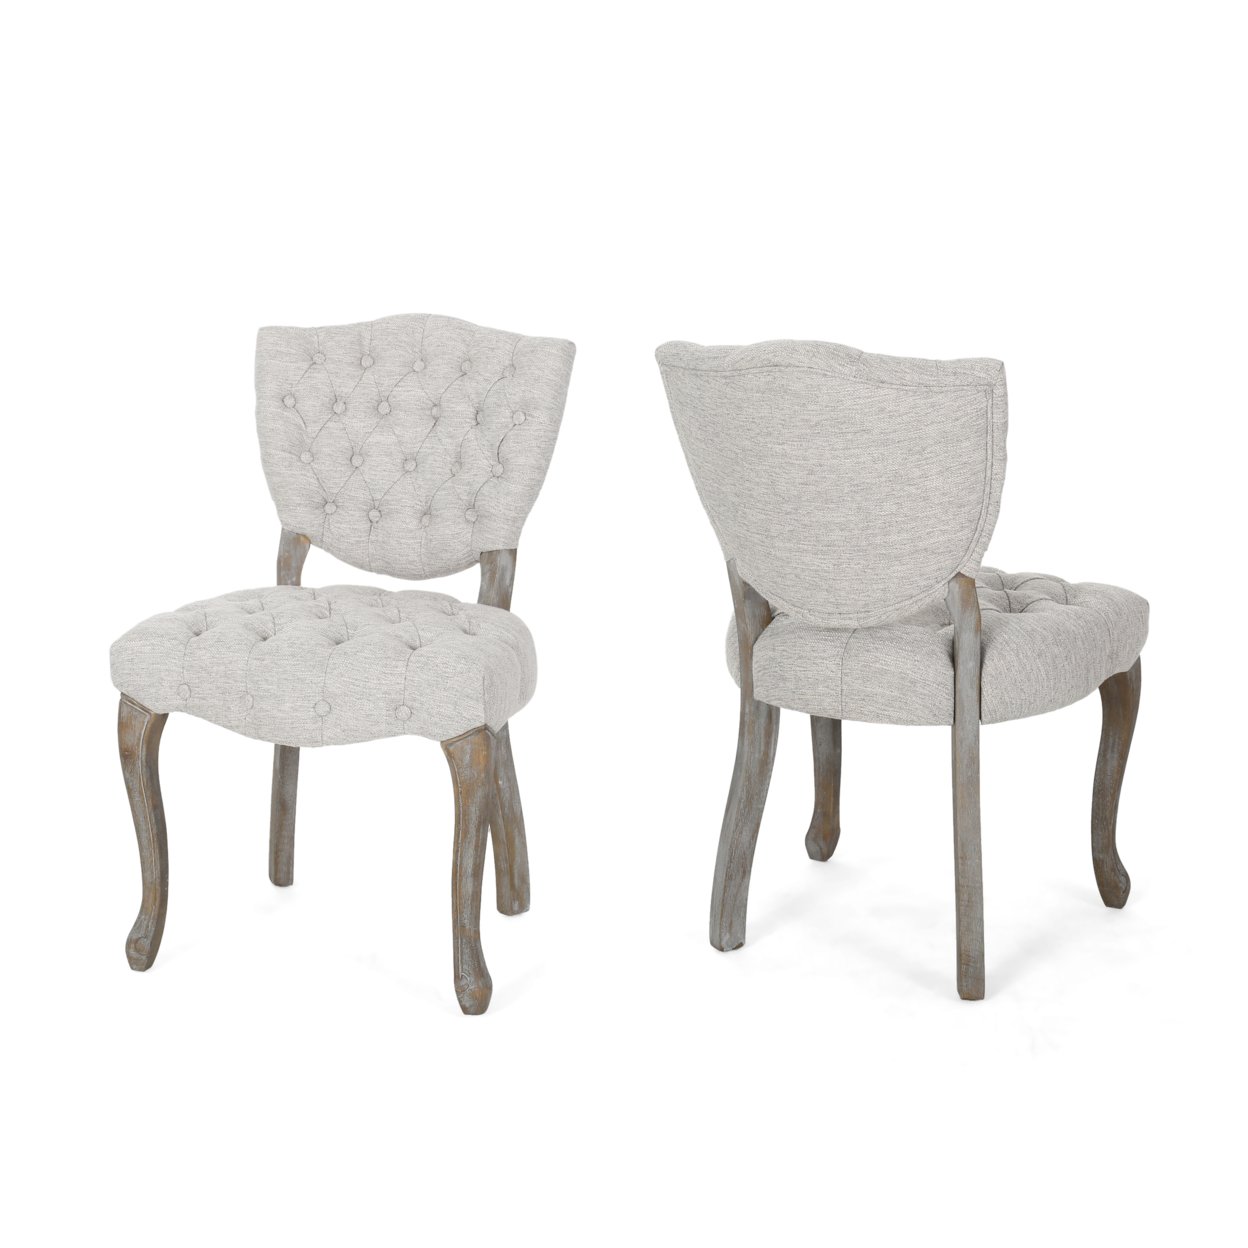 Case Tufted Dining Chair With Cabriole Legs (Set Of 2) - Light Gray + Brown Wash Finish